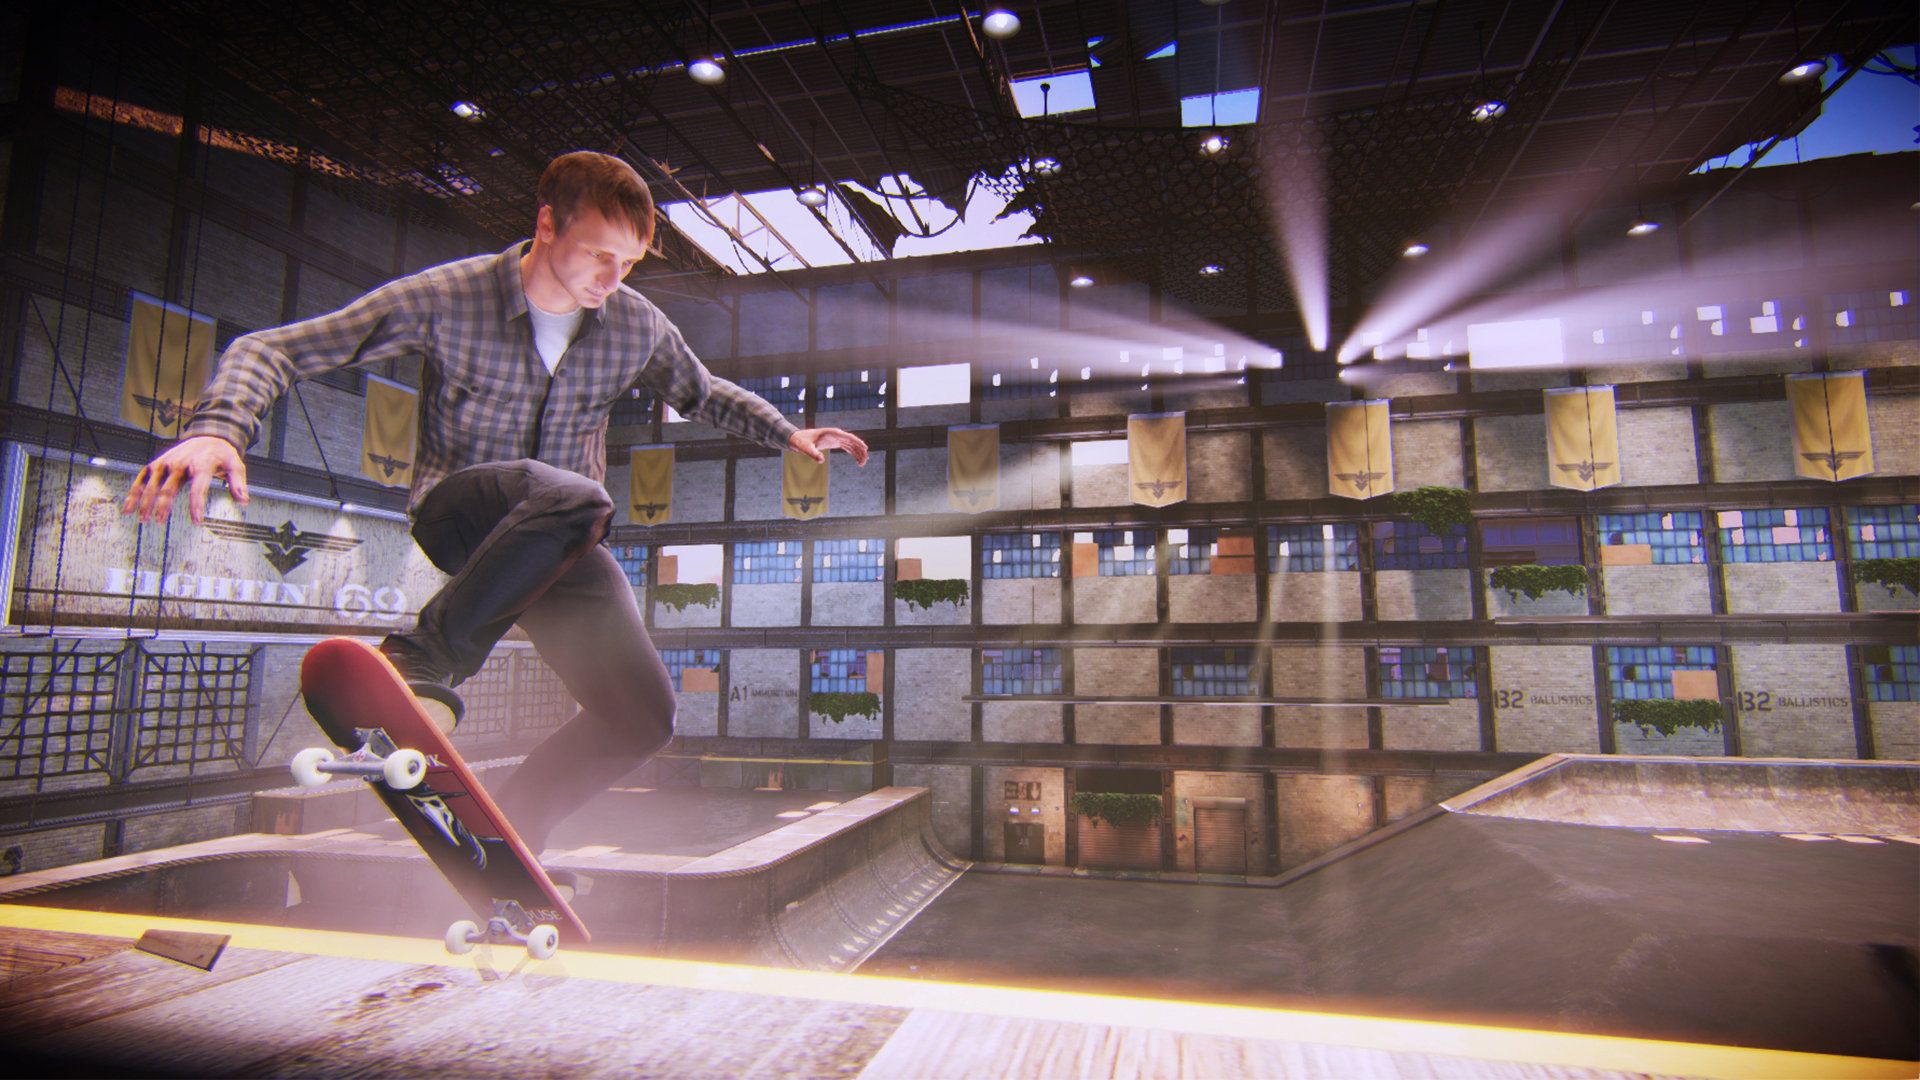 Here's How Tony Hawk's Pro Skater 5 Recreated Real Skaters In Game